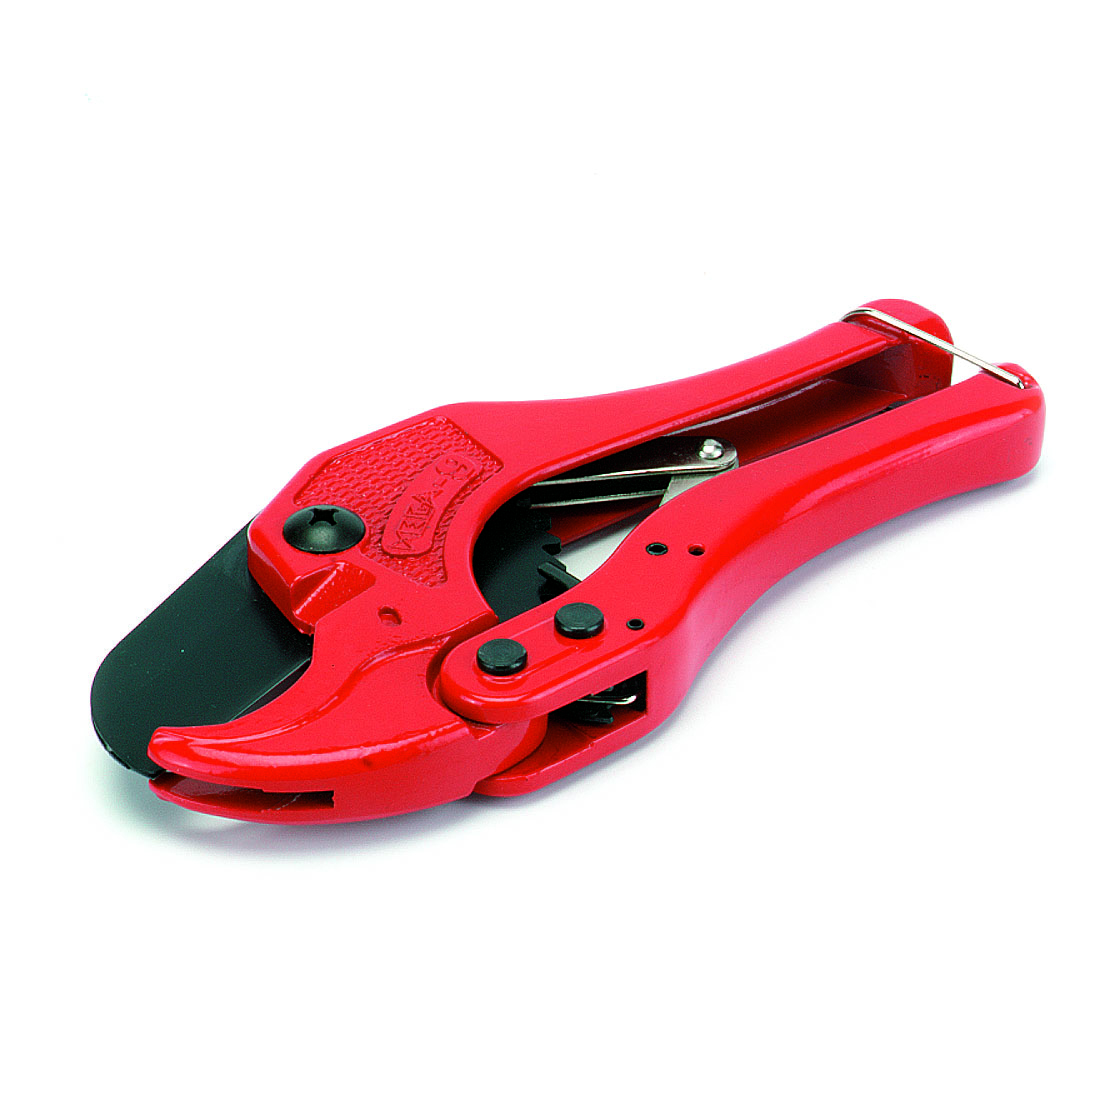 9508080 Pex pipe cutter 12 to 32mm